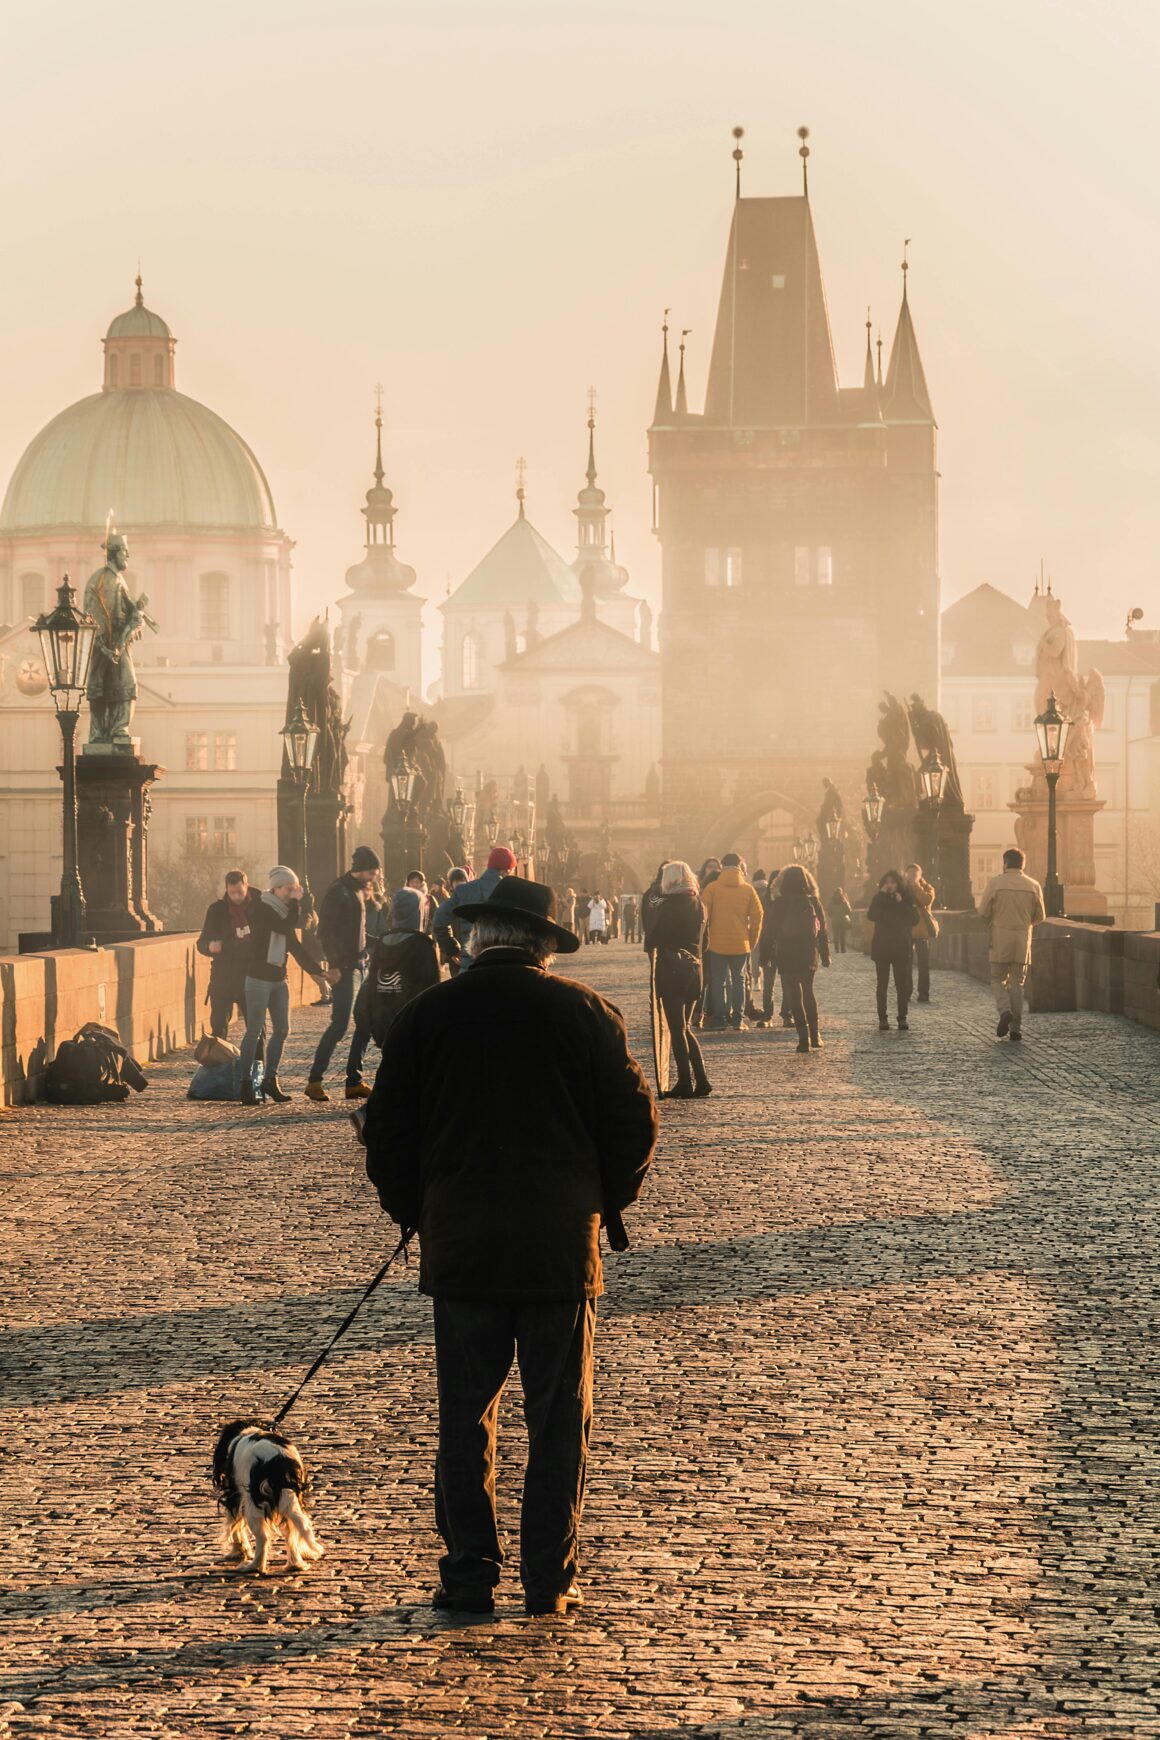 Charles Bridge, one of the best free things to do in Prague